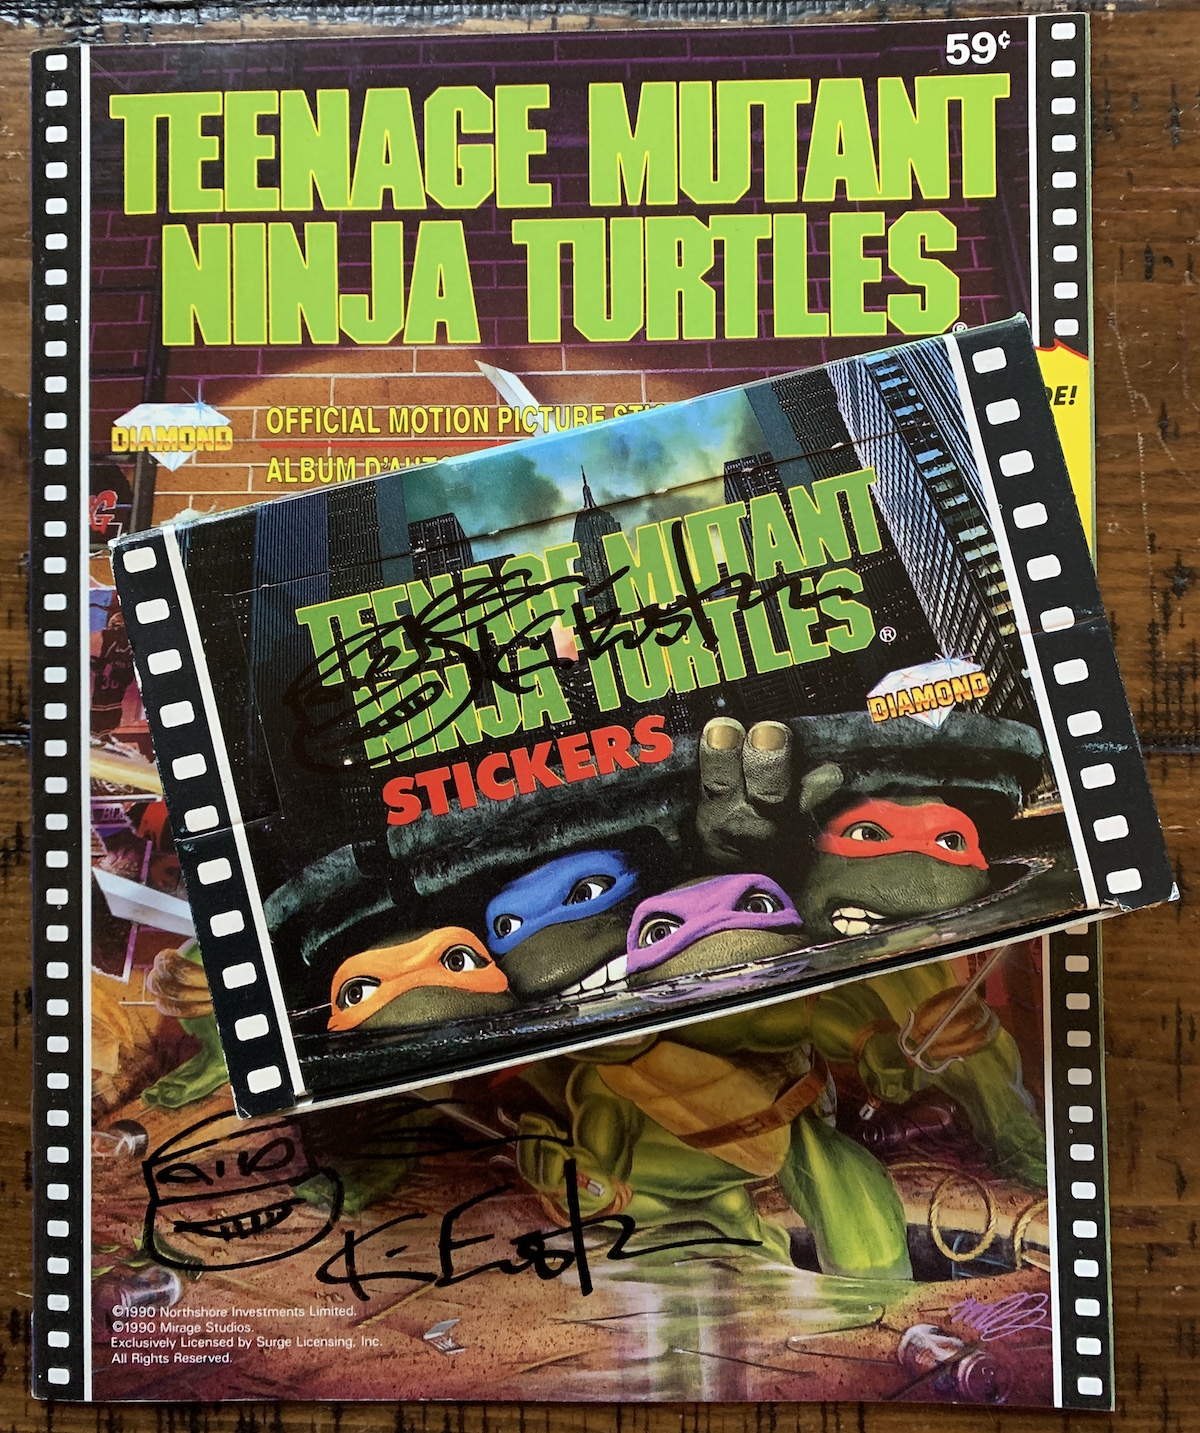 1990 TMNT Official Motion Pictures Sticker Book and Stickers Set – Signed